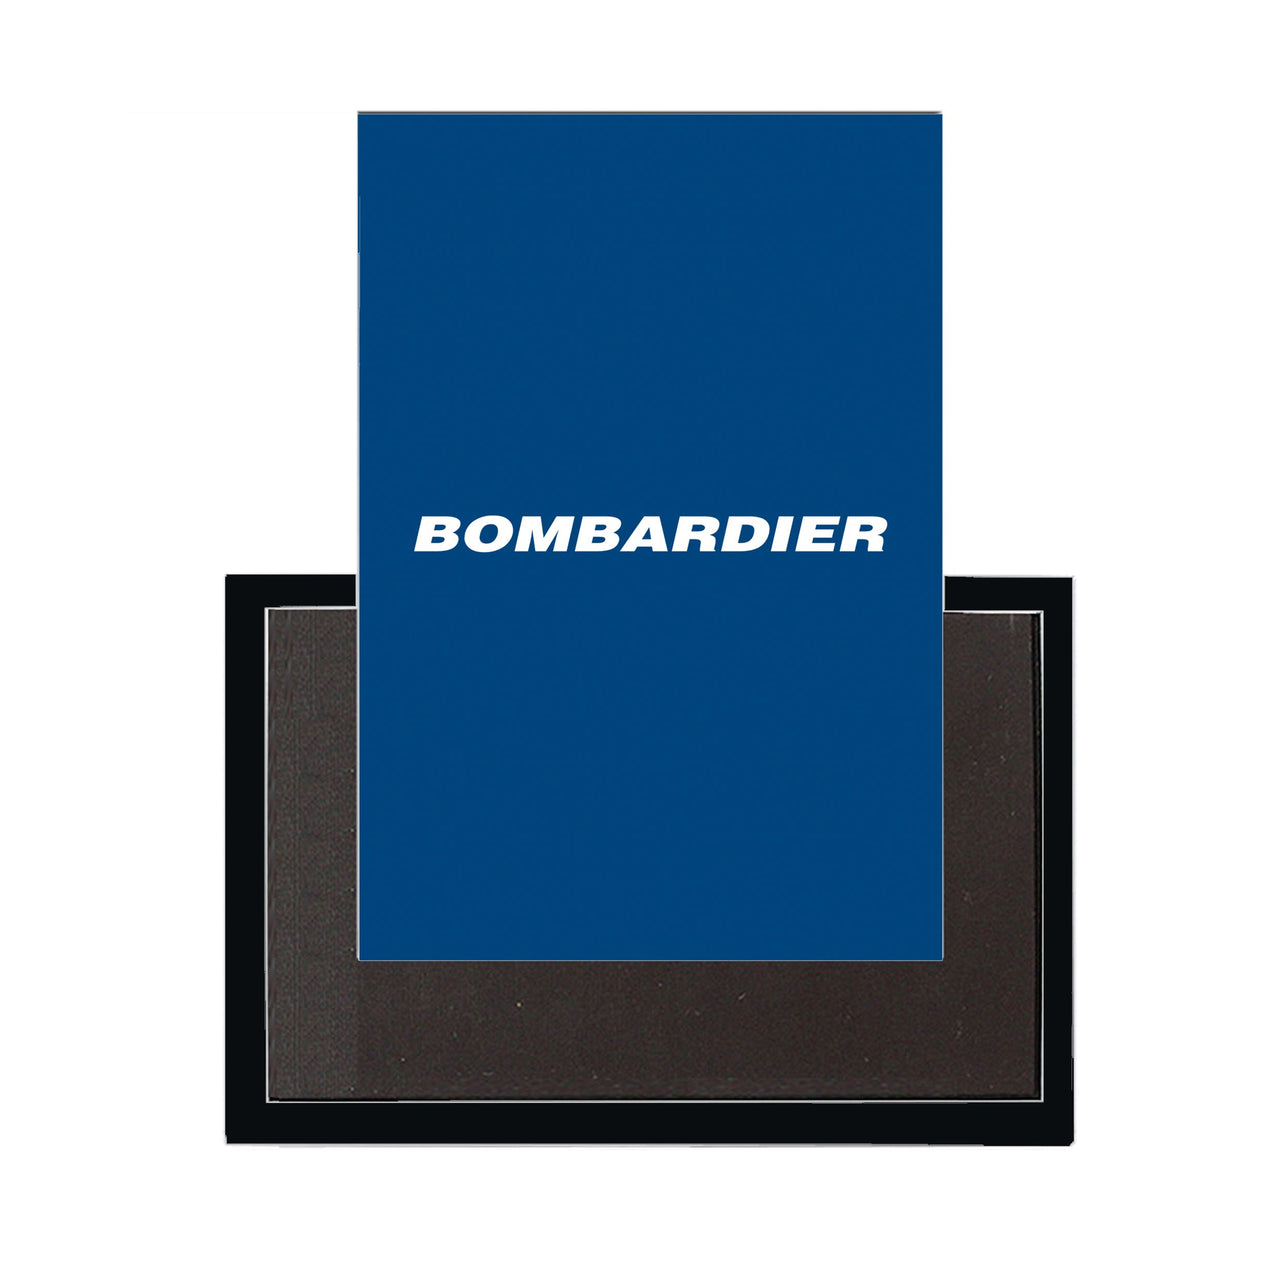 Bombardier & Text Designed Magnets